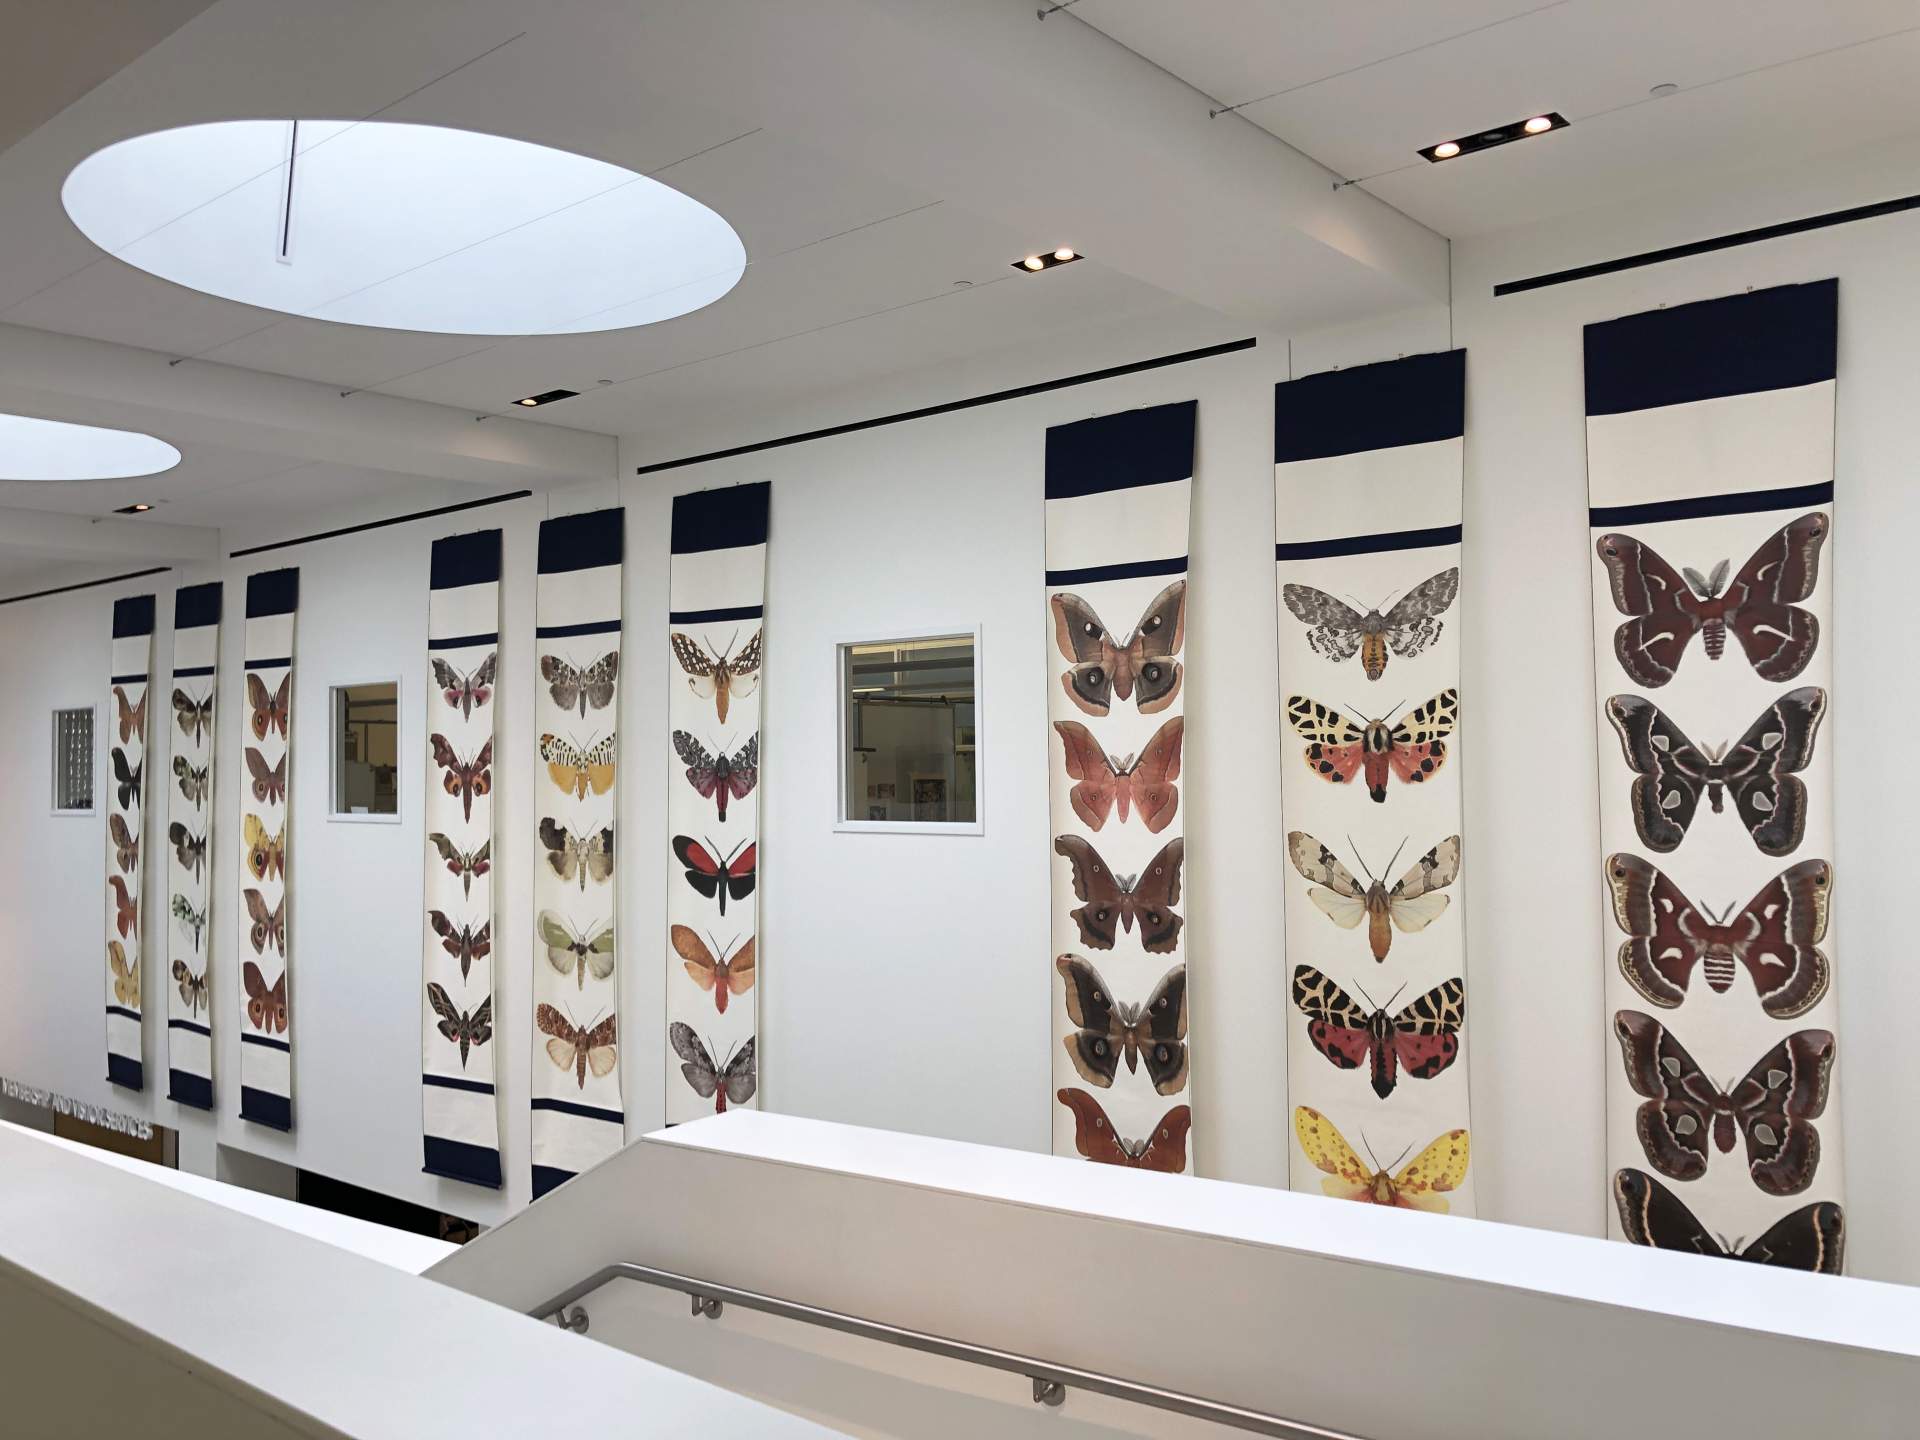 [Photograph of the installation by Joseph Scheer entitled "Moth Scrolls"]